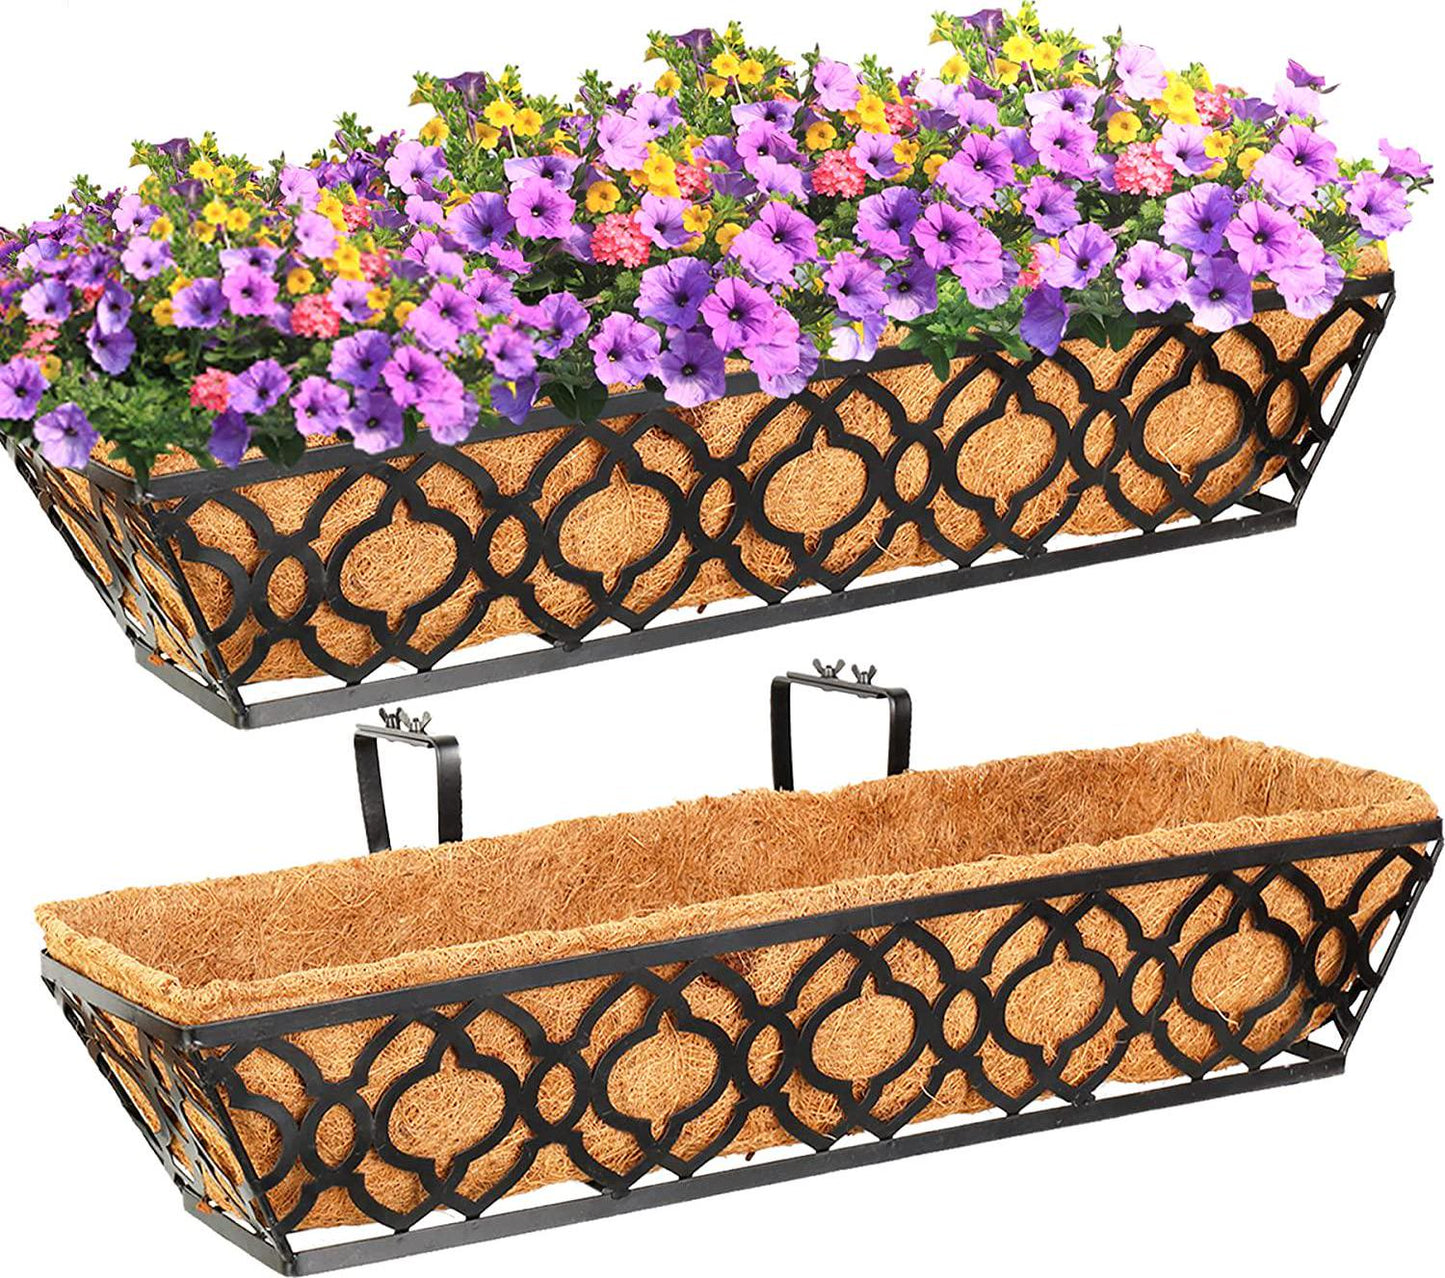 LAWYAMAI 2pcs 24 Inch Window Deck with Coco Liner, 24 Window Boxes Horse Trough with Coconut Coir Liner,Metal Hanging Flower Planter Window Basket Deck Railing Planter Boxes for Outdoor Indoor Lawn-